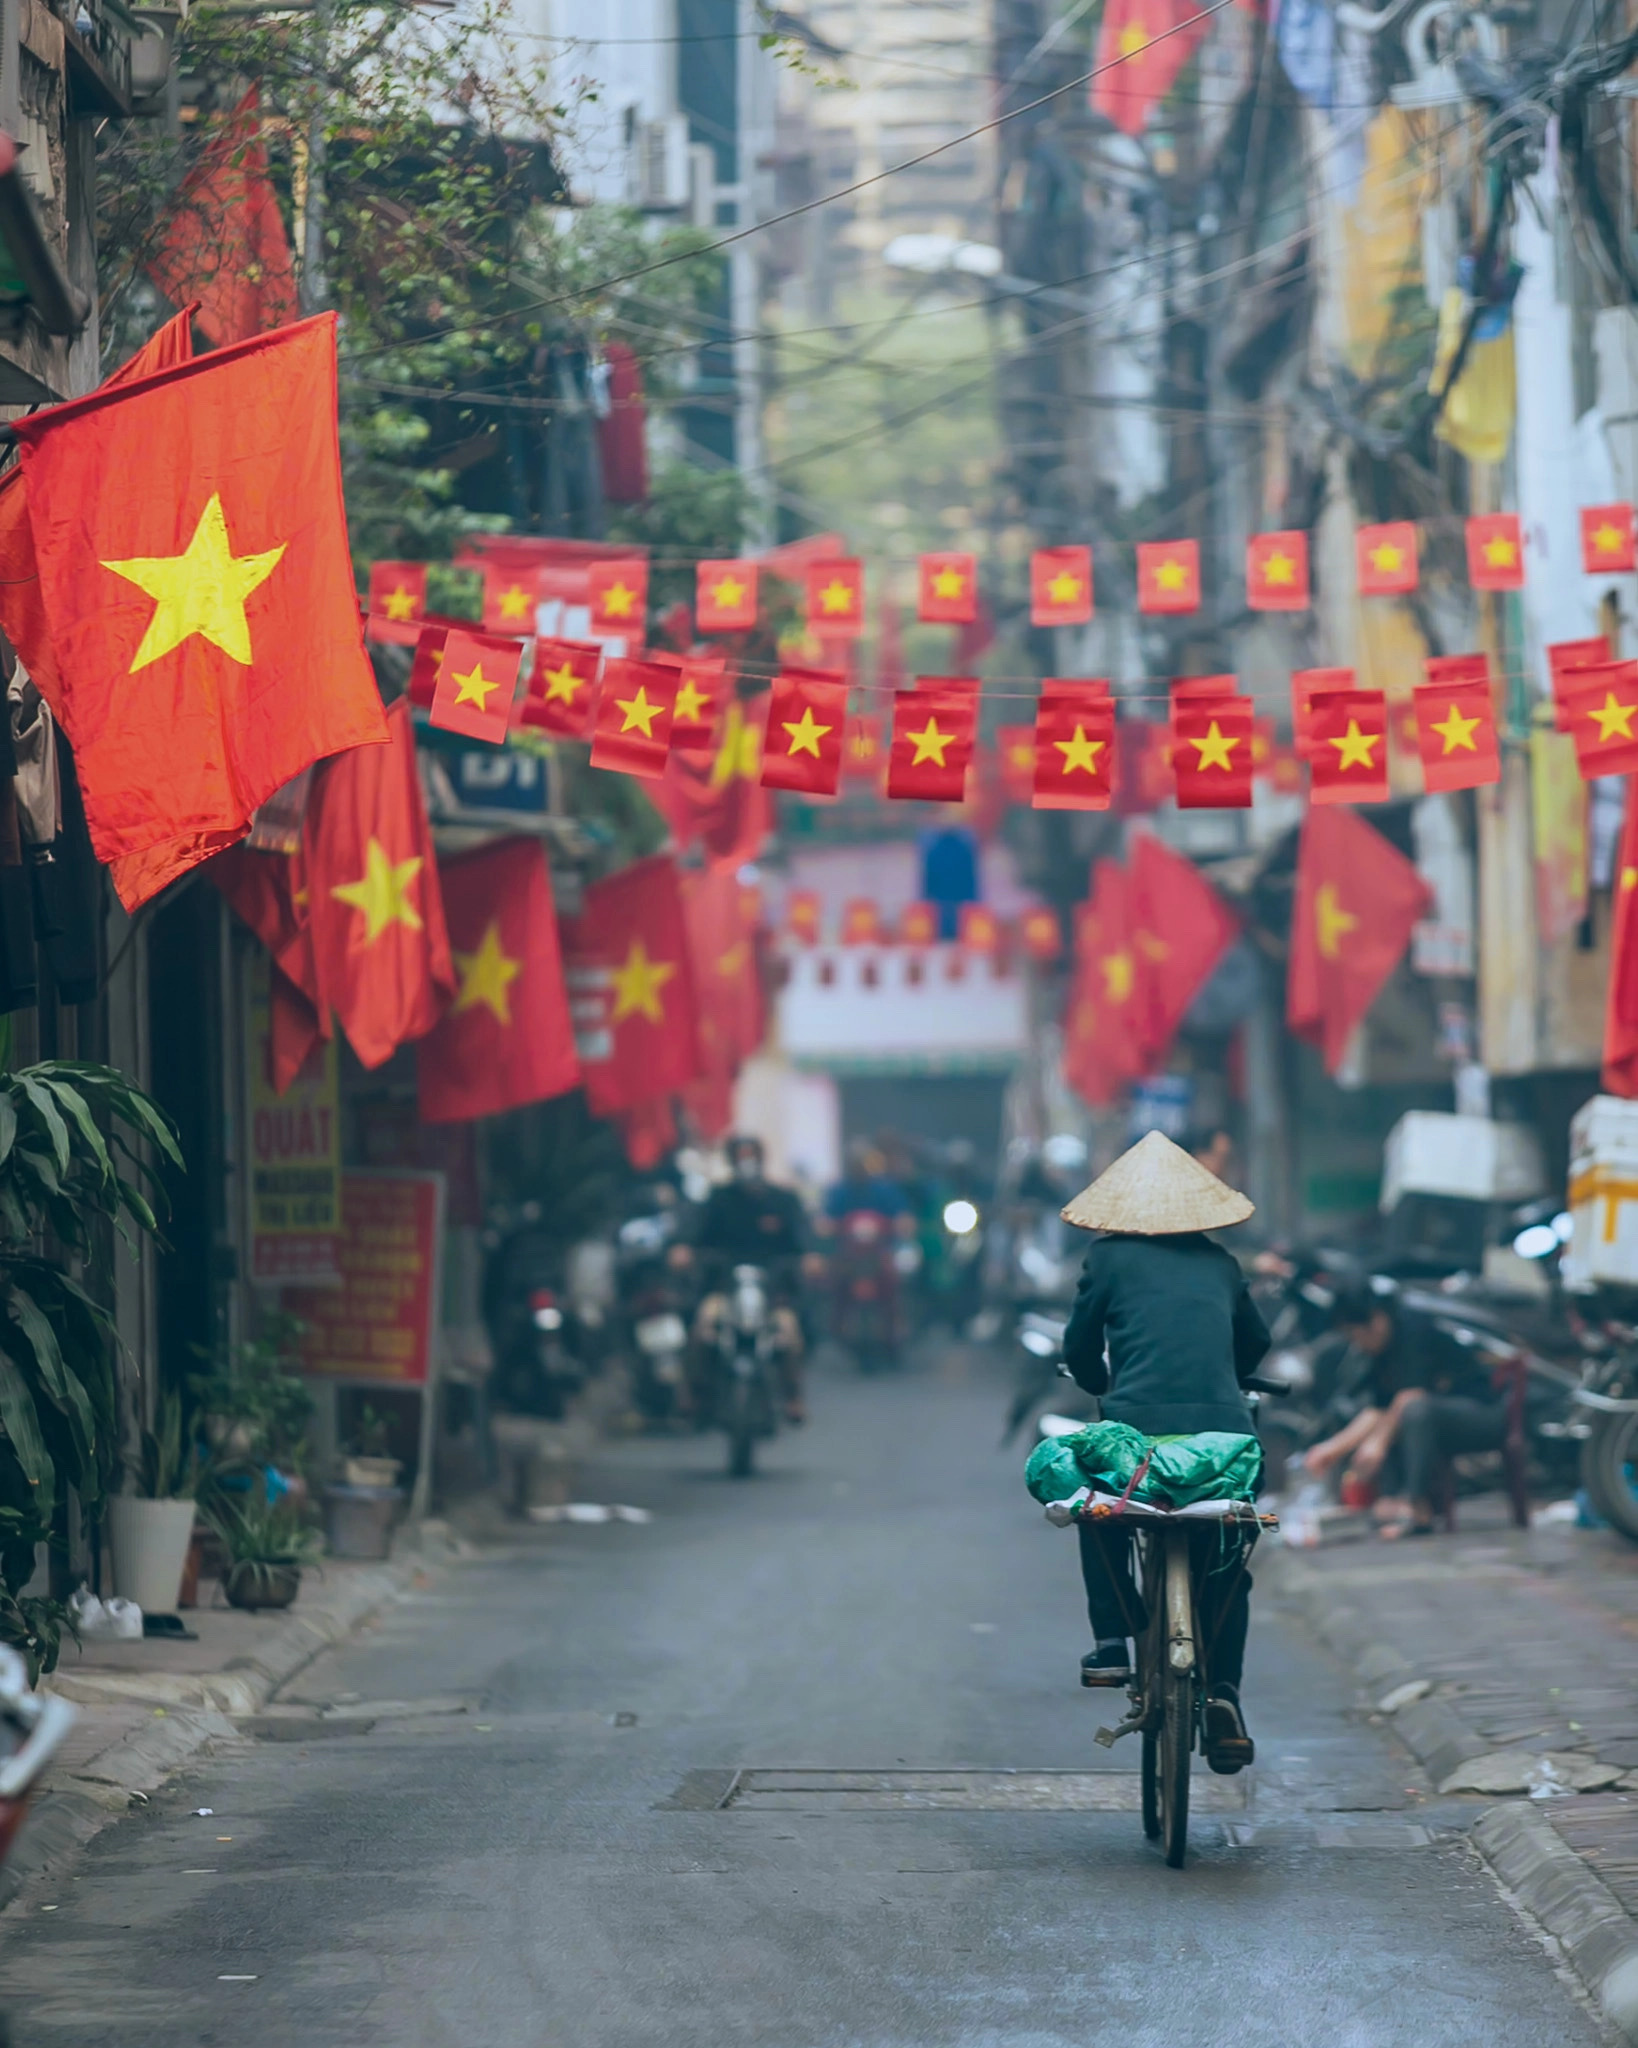 A woman rides a bicycle on a street festooned with Vietnamese national flags in Hanoi. Photo: Lee Hyo-seung